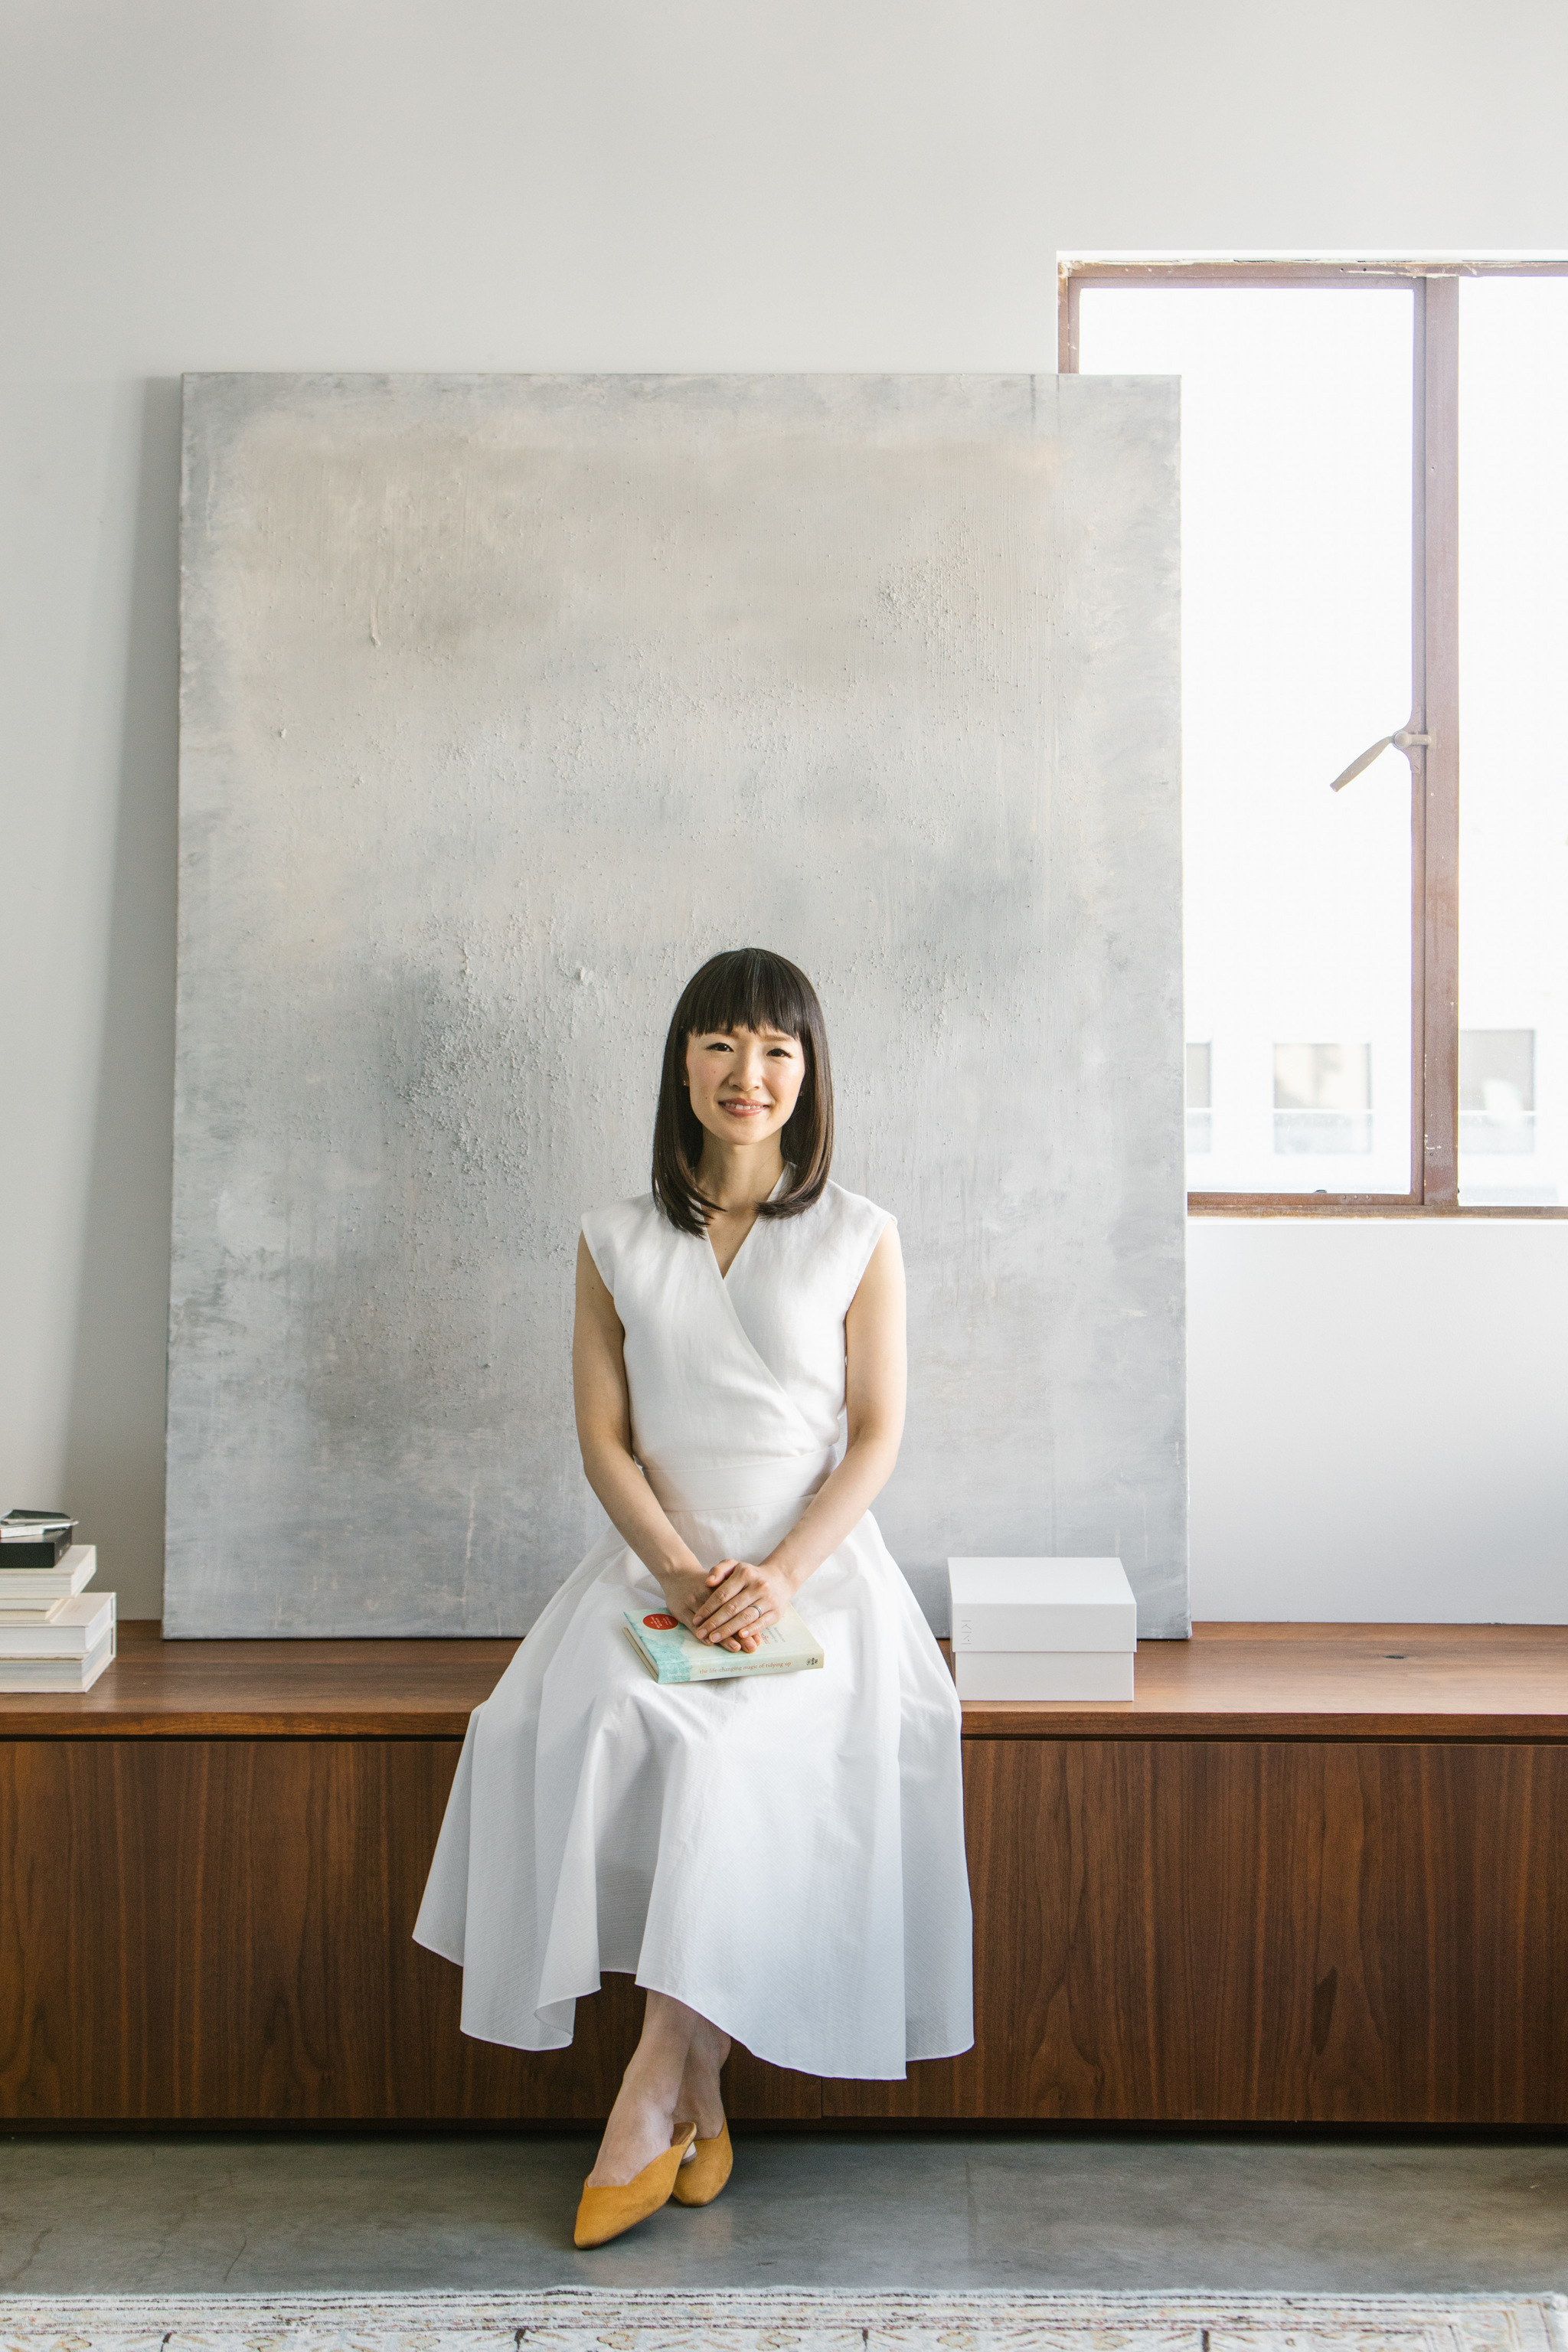 Marie Kondo in her new book "they